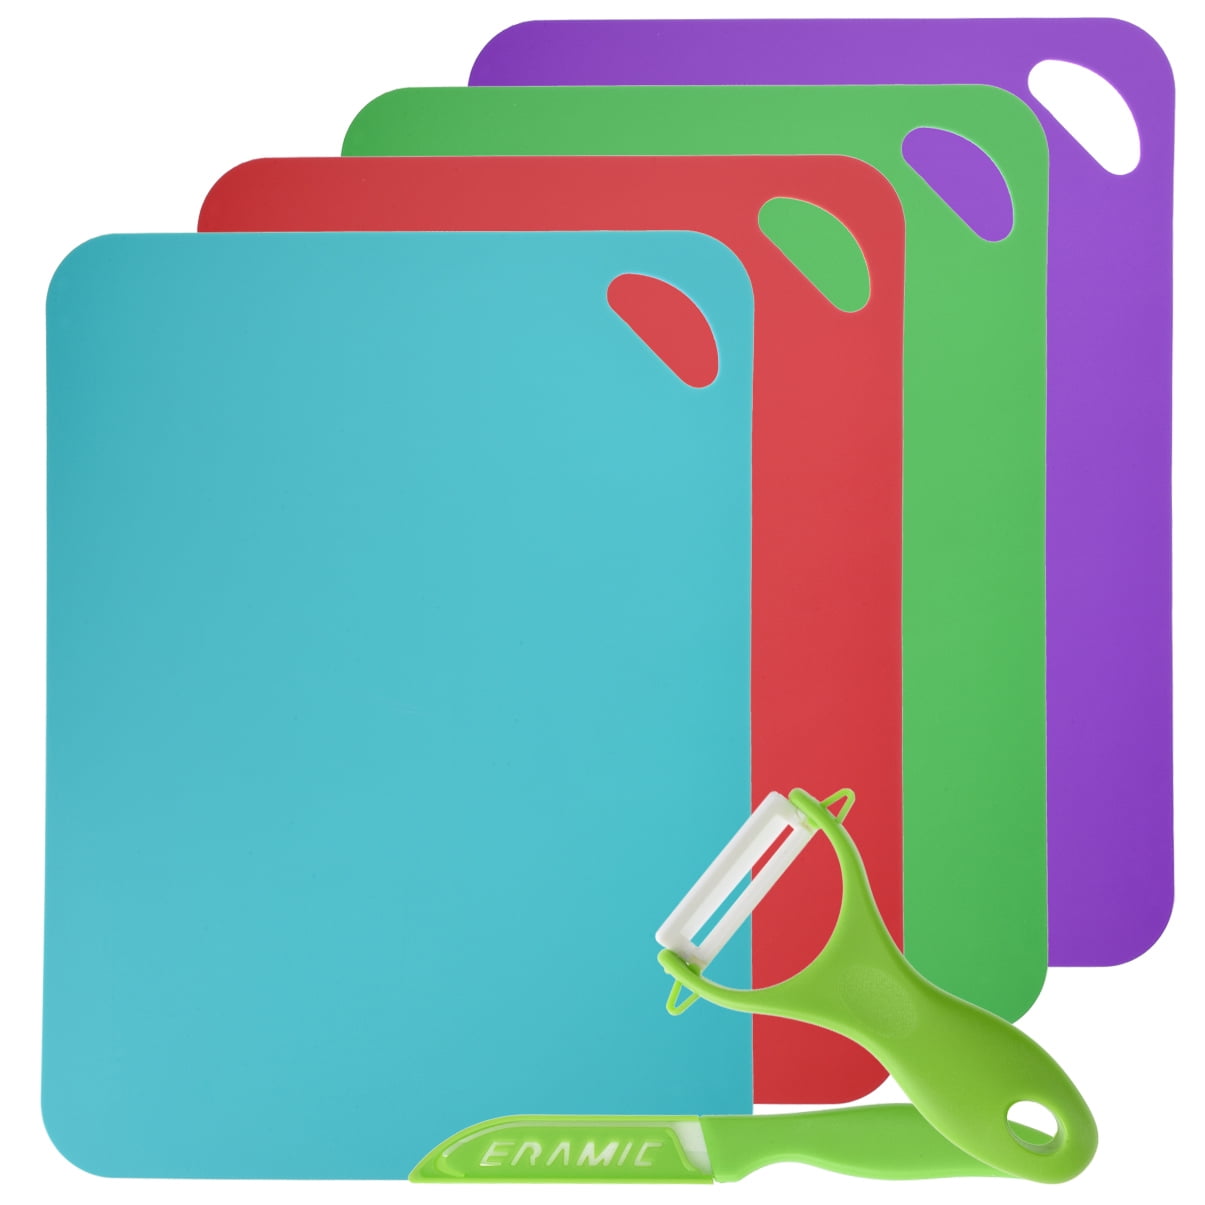 PACK OF 4 x FLEXIBLE PLASTIC CUTTING CHOPPING BOARDS SLICING MATS COLOUR